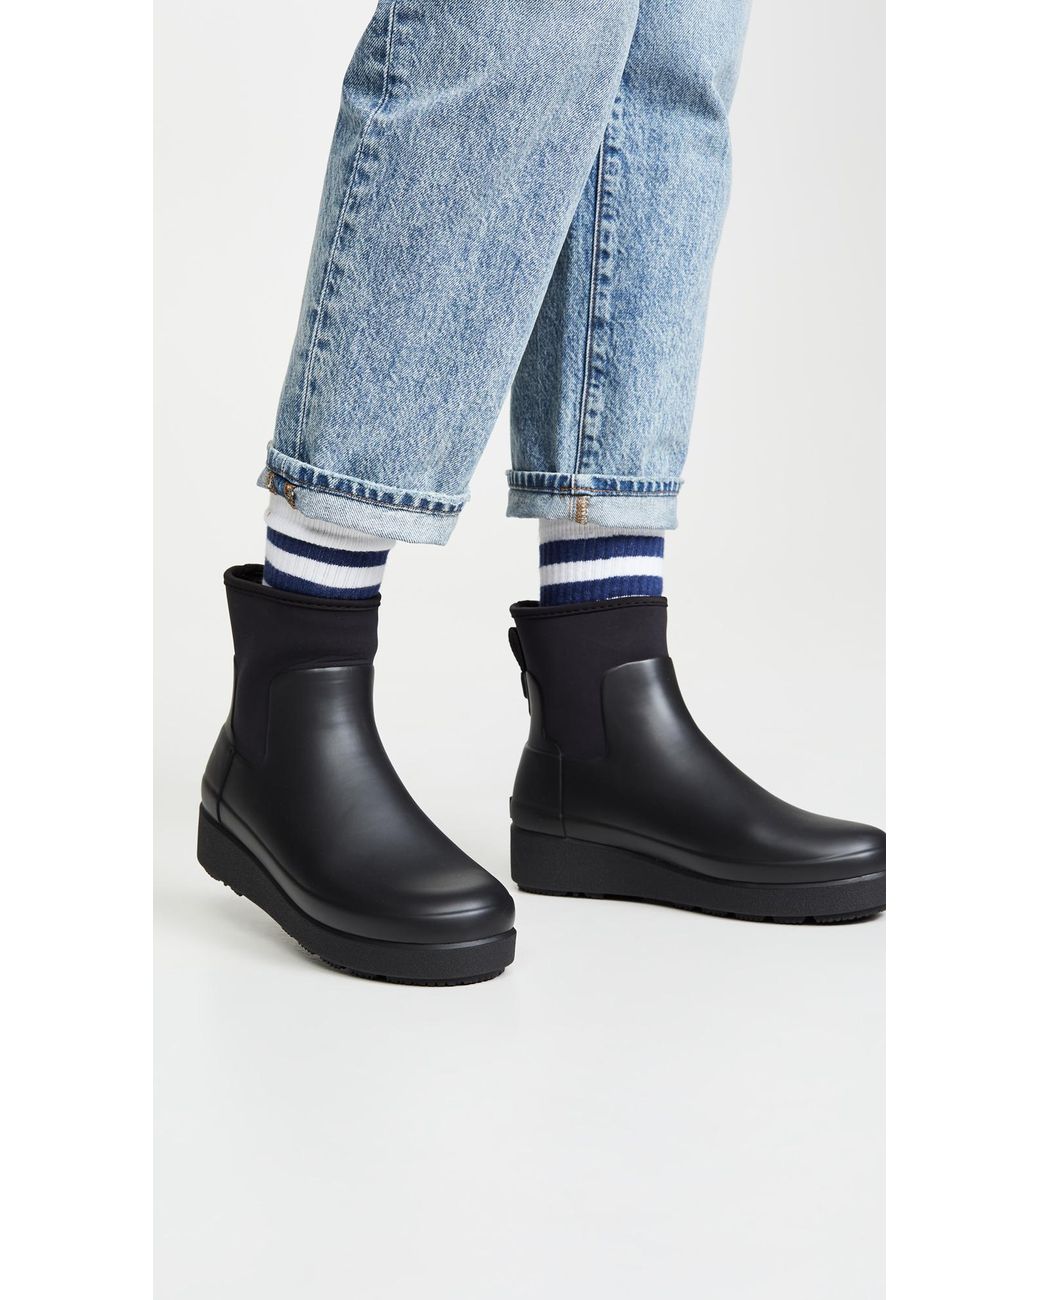 HUNTER Rubber Refined Creeper Neo Chelsea Boots in Black - Save 3 